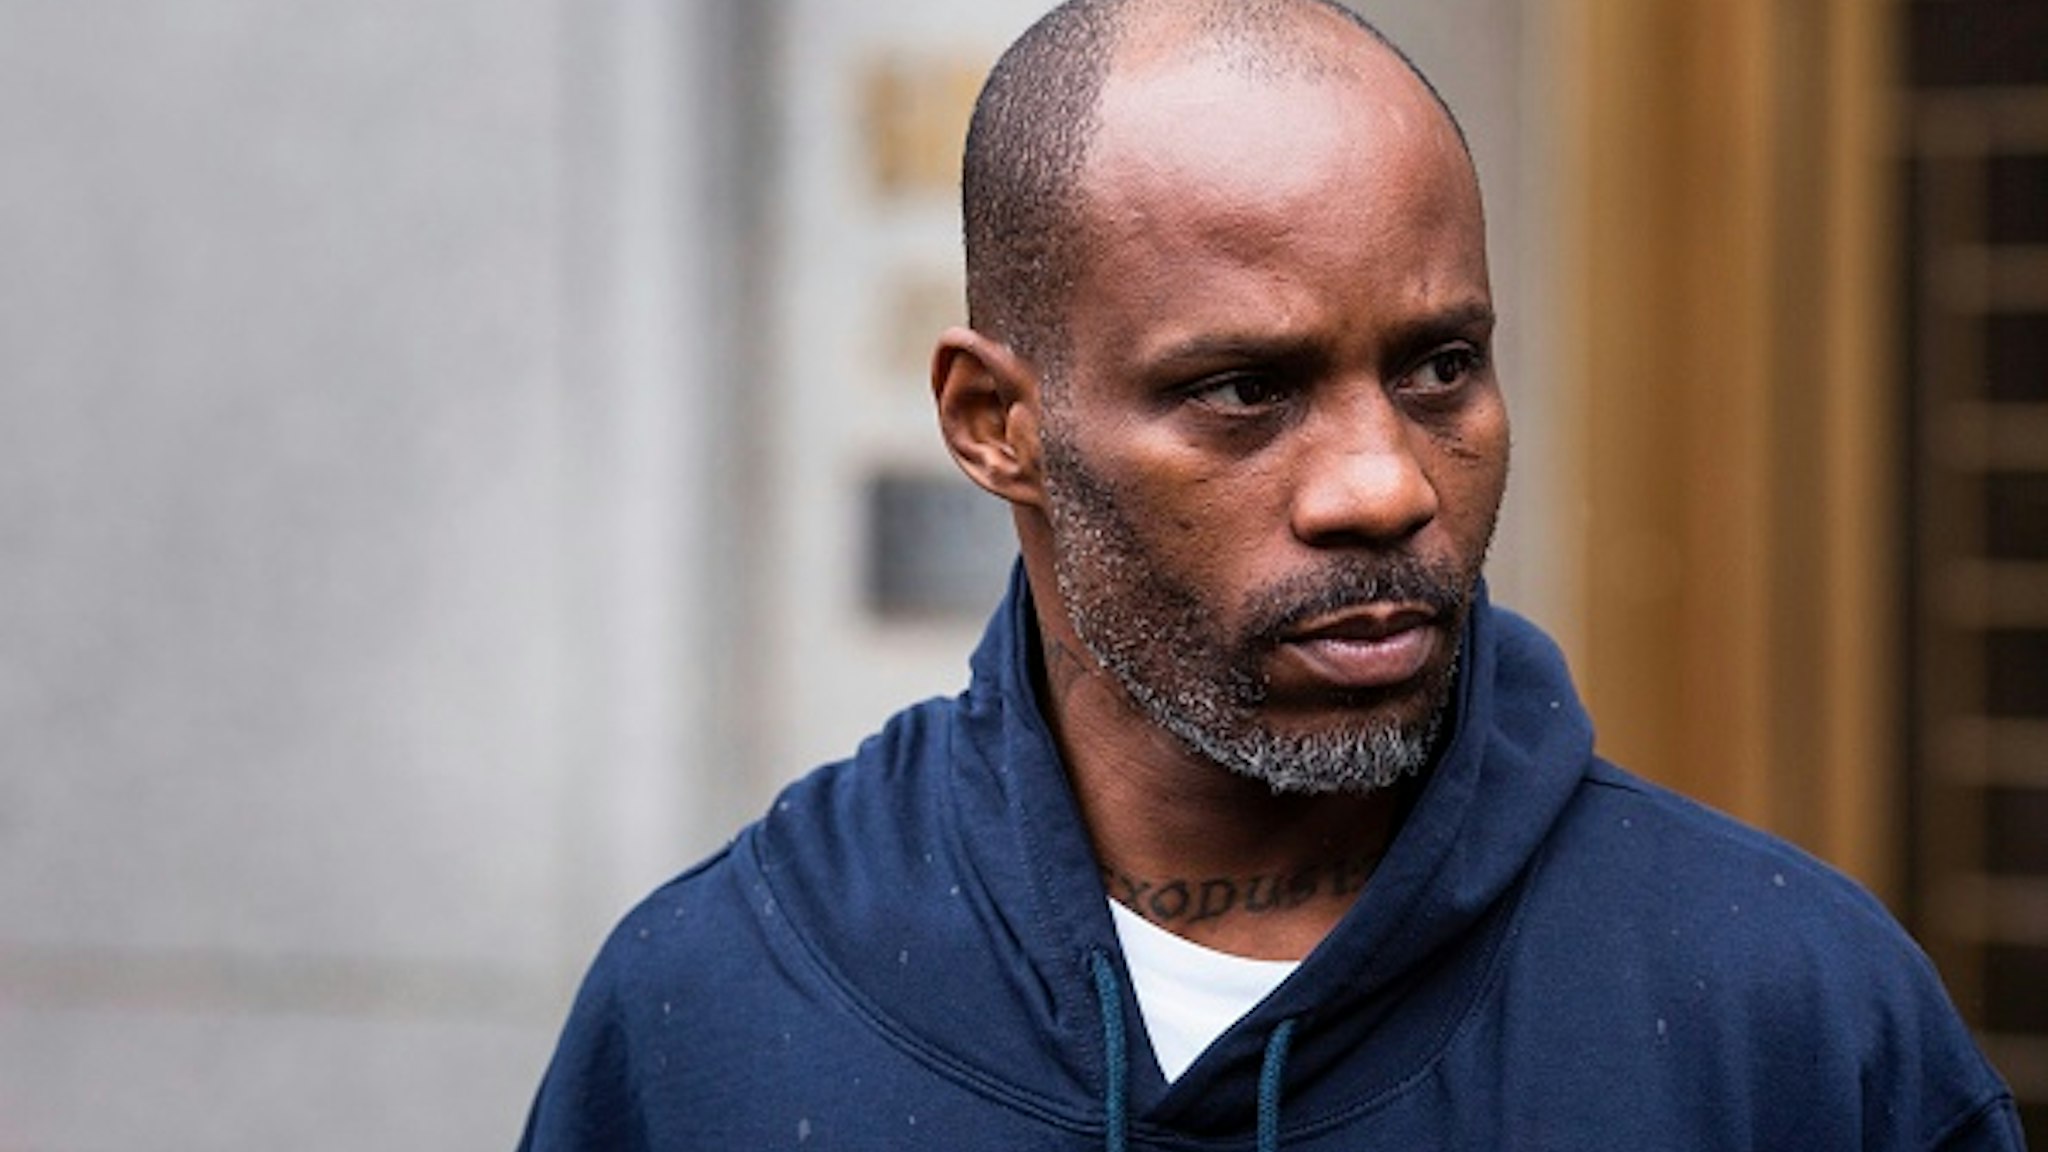 Hip-hop recording artist Earl Simmons, aka DMX leaves the U.S. District Court after being arraigned, July 14, 2017, in New York City. Simmons is accused engaging in a multi-year scheme to conceal millions of dollars of income from the IRS and to avoid paying $1.7 million of tax liabilities /